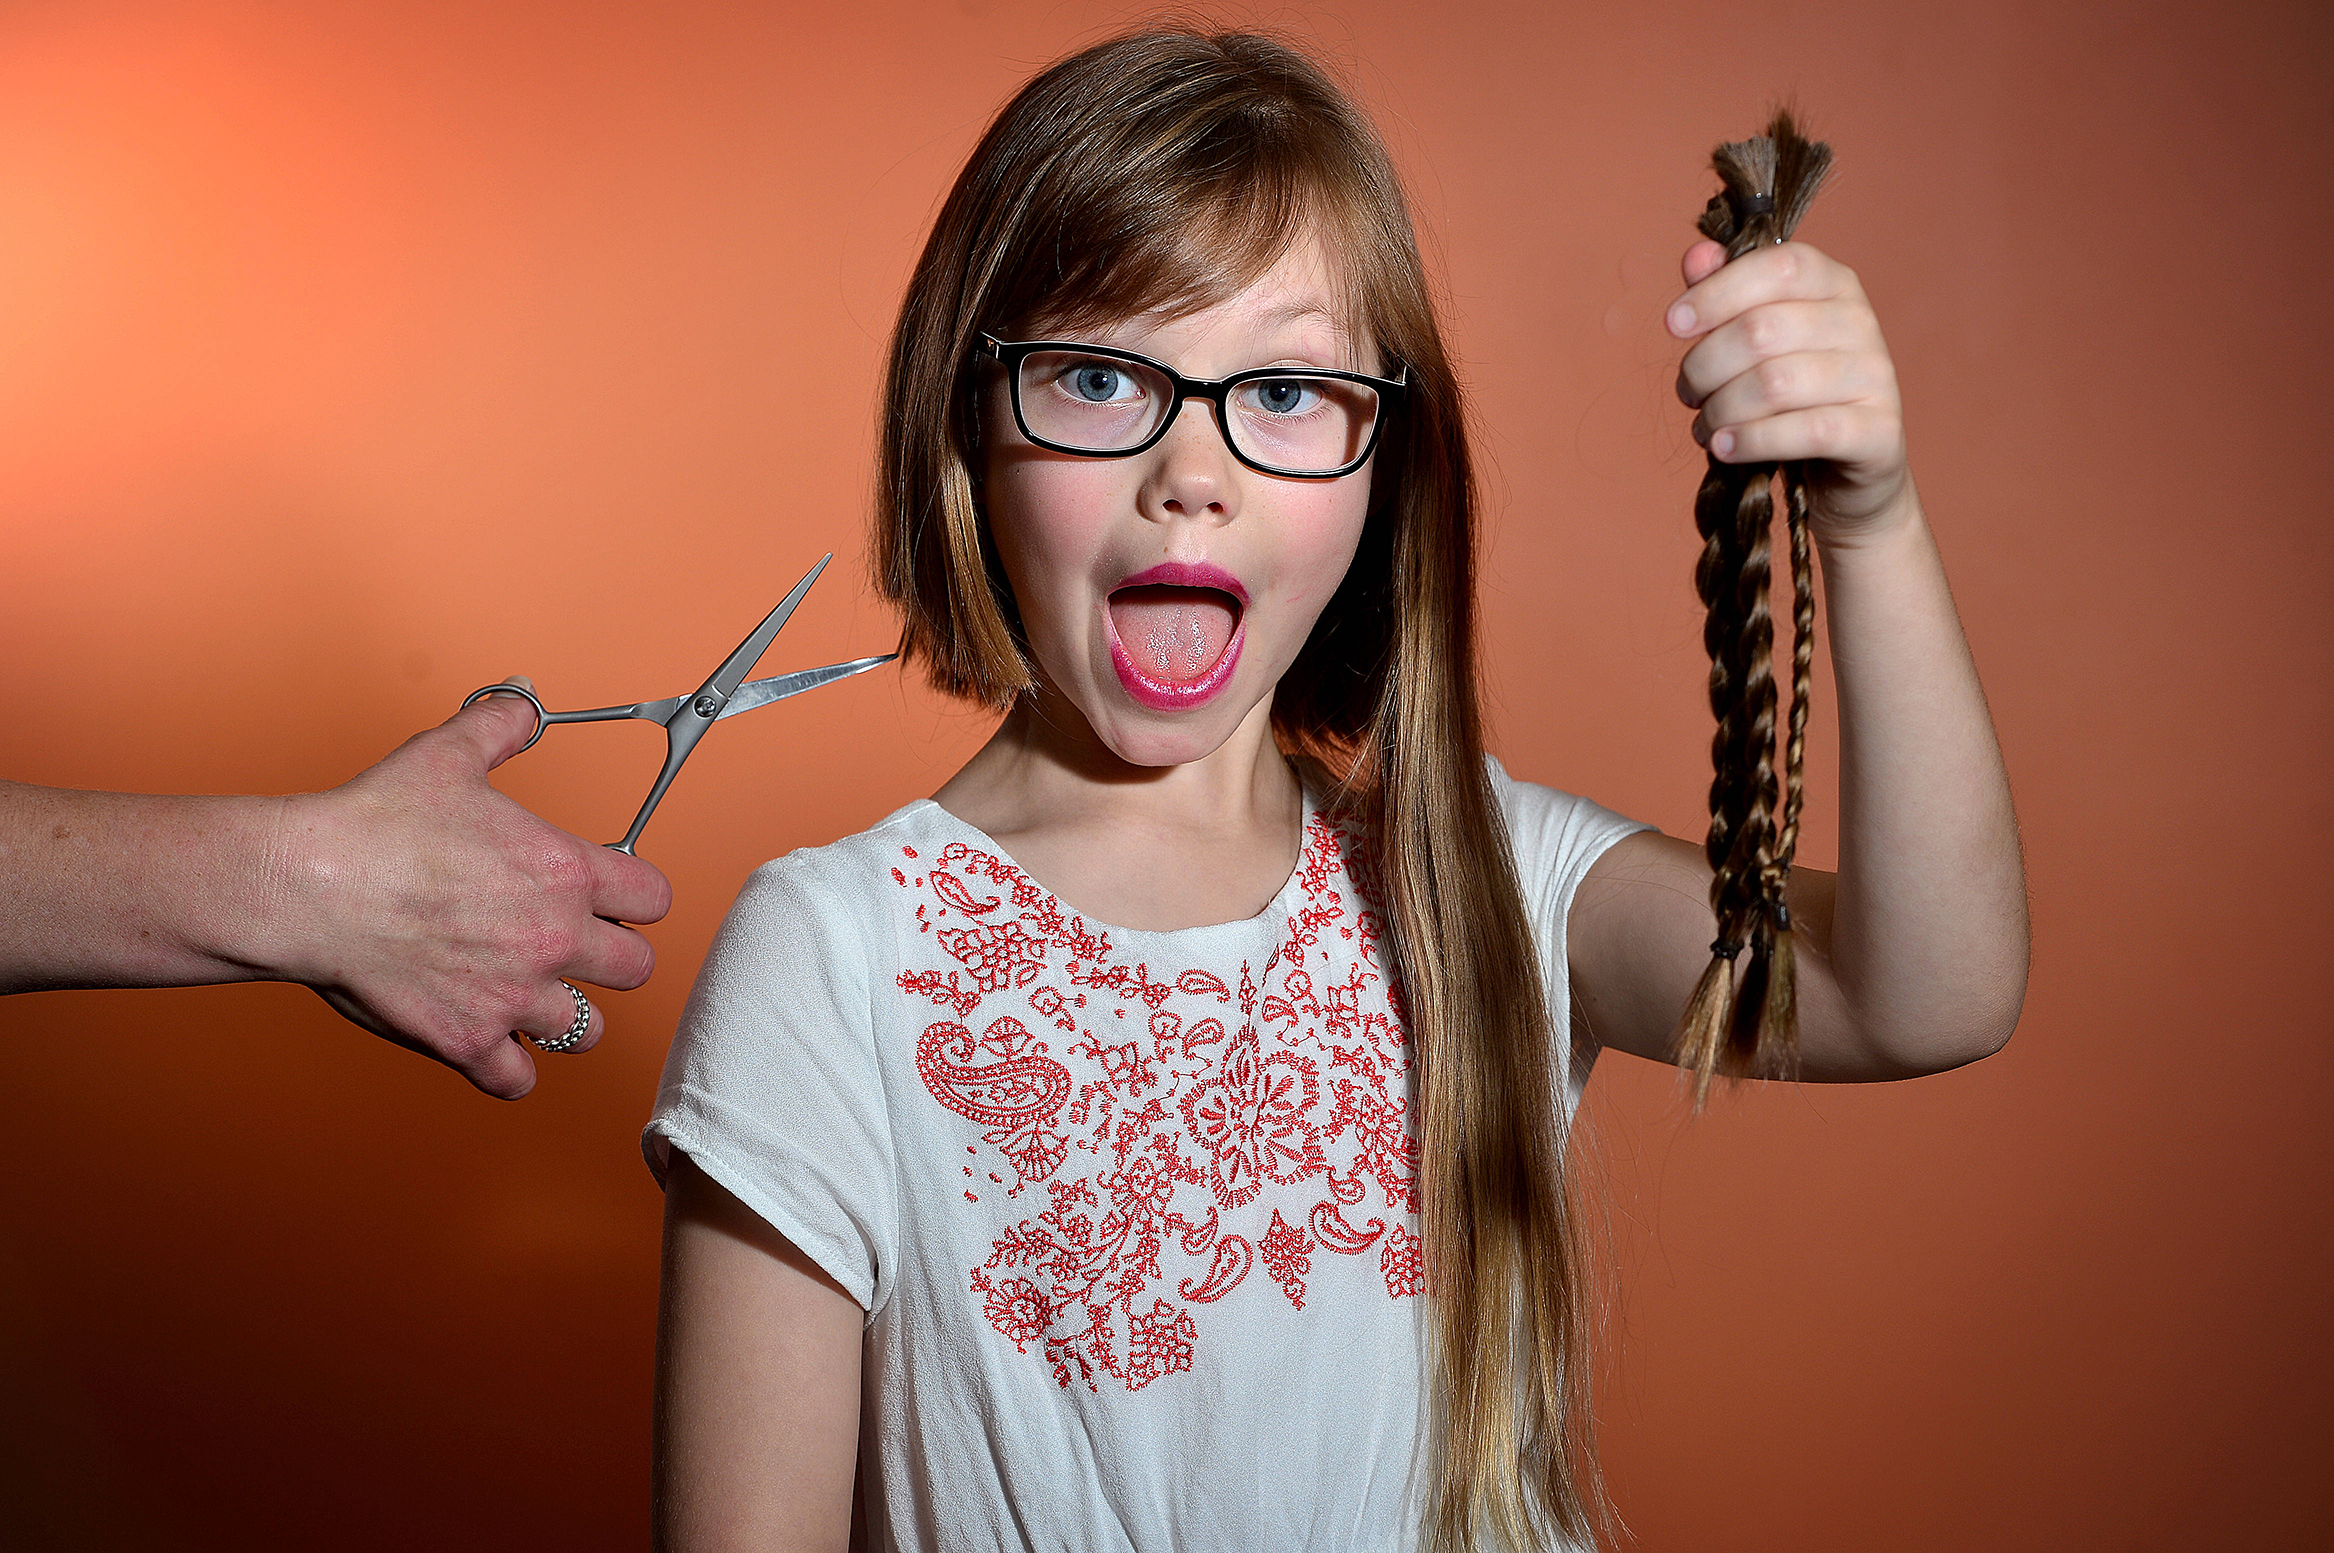  4.3.17 - 8 year old Matilda Ebert is cutting most of her hair off as part of World's Greatest Shave, and donating it to Wigs for Kids. (The Advertiser, News Corp Australia) 